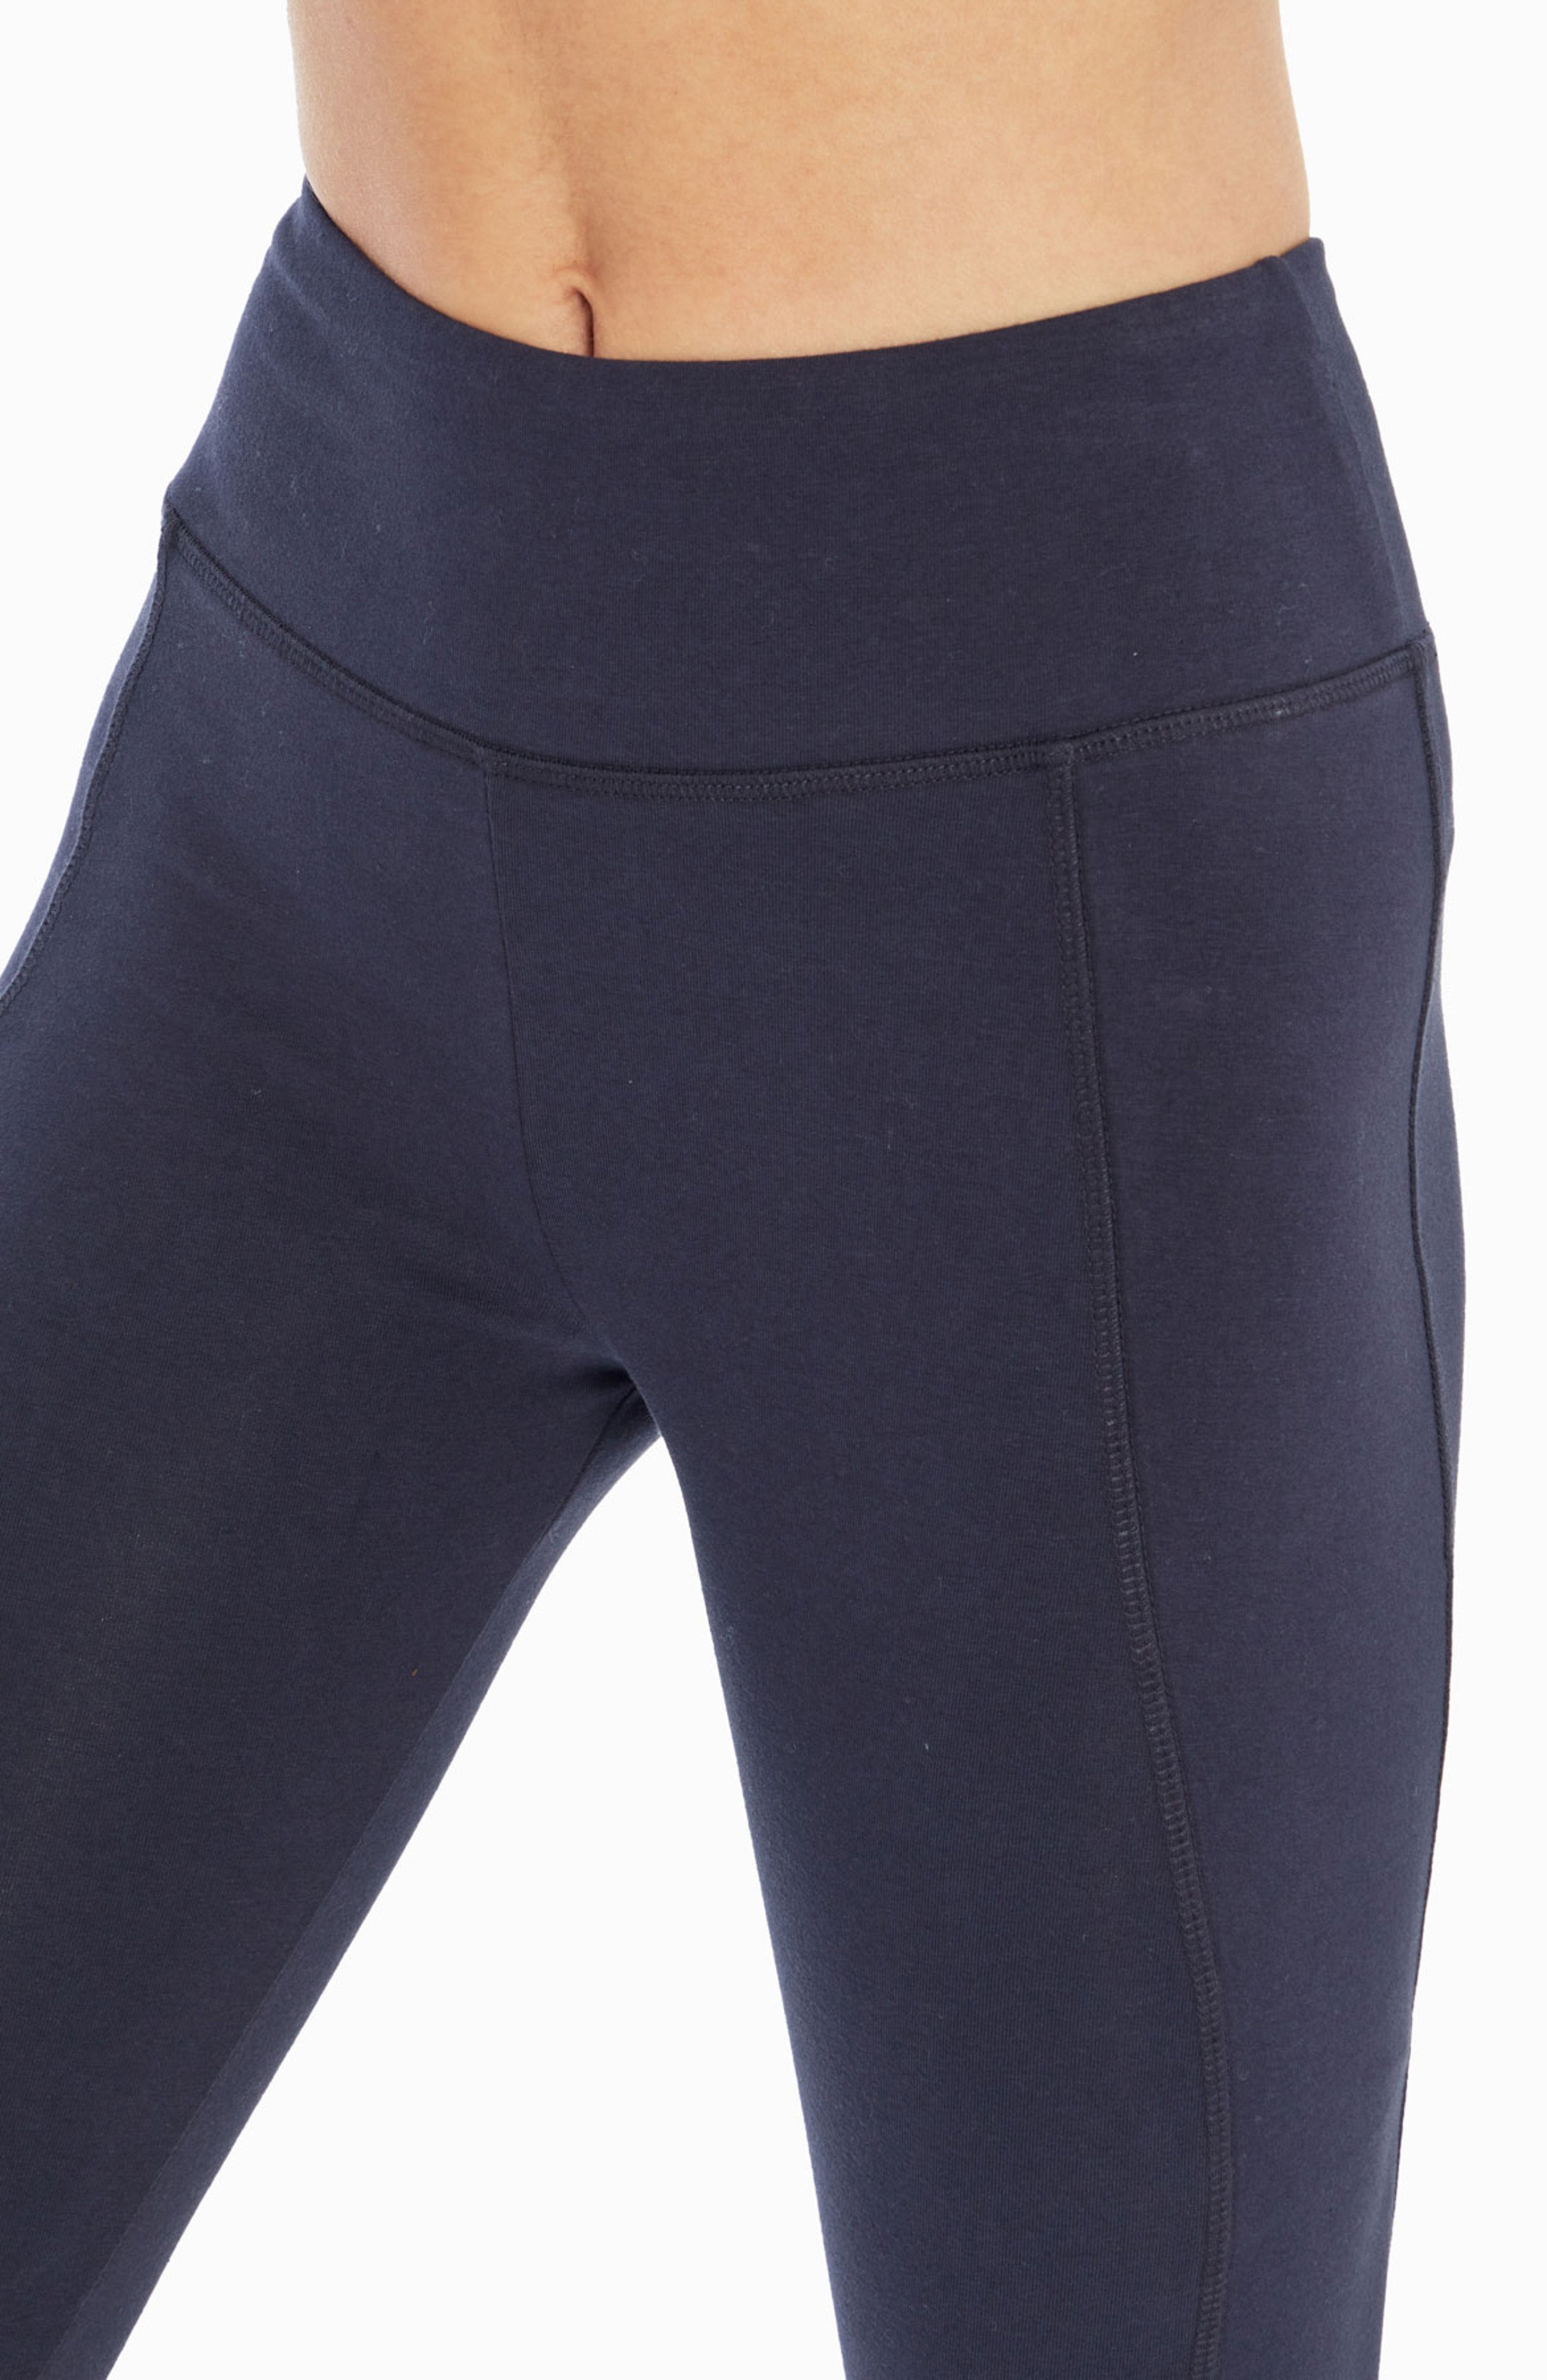 Marika Fitness - On the go? We've got you covered. The Callie Side